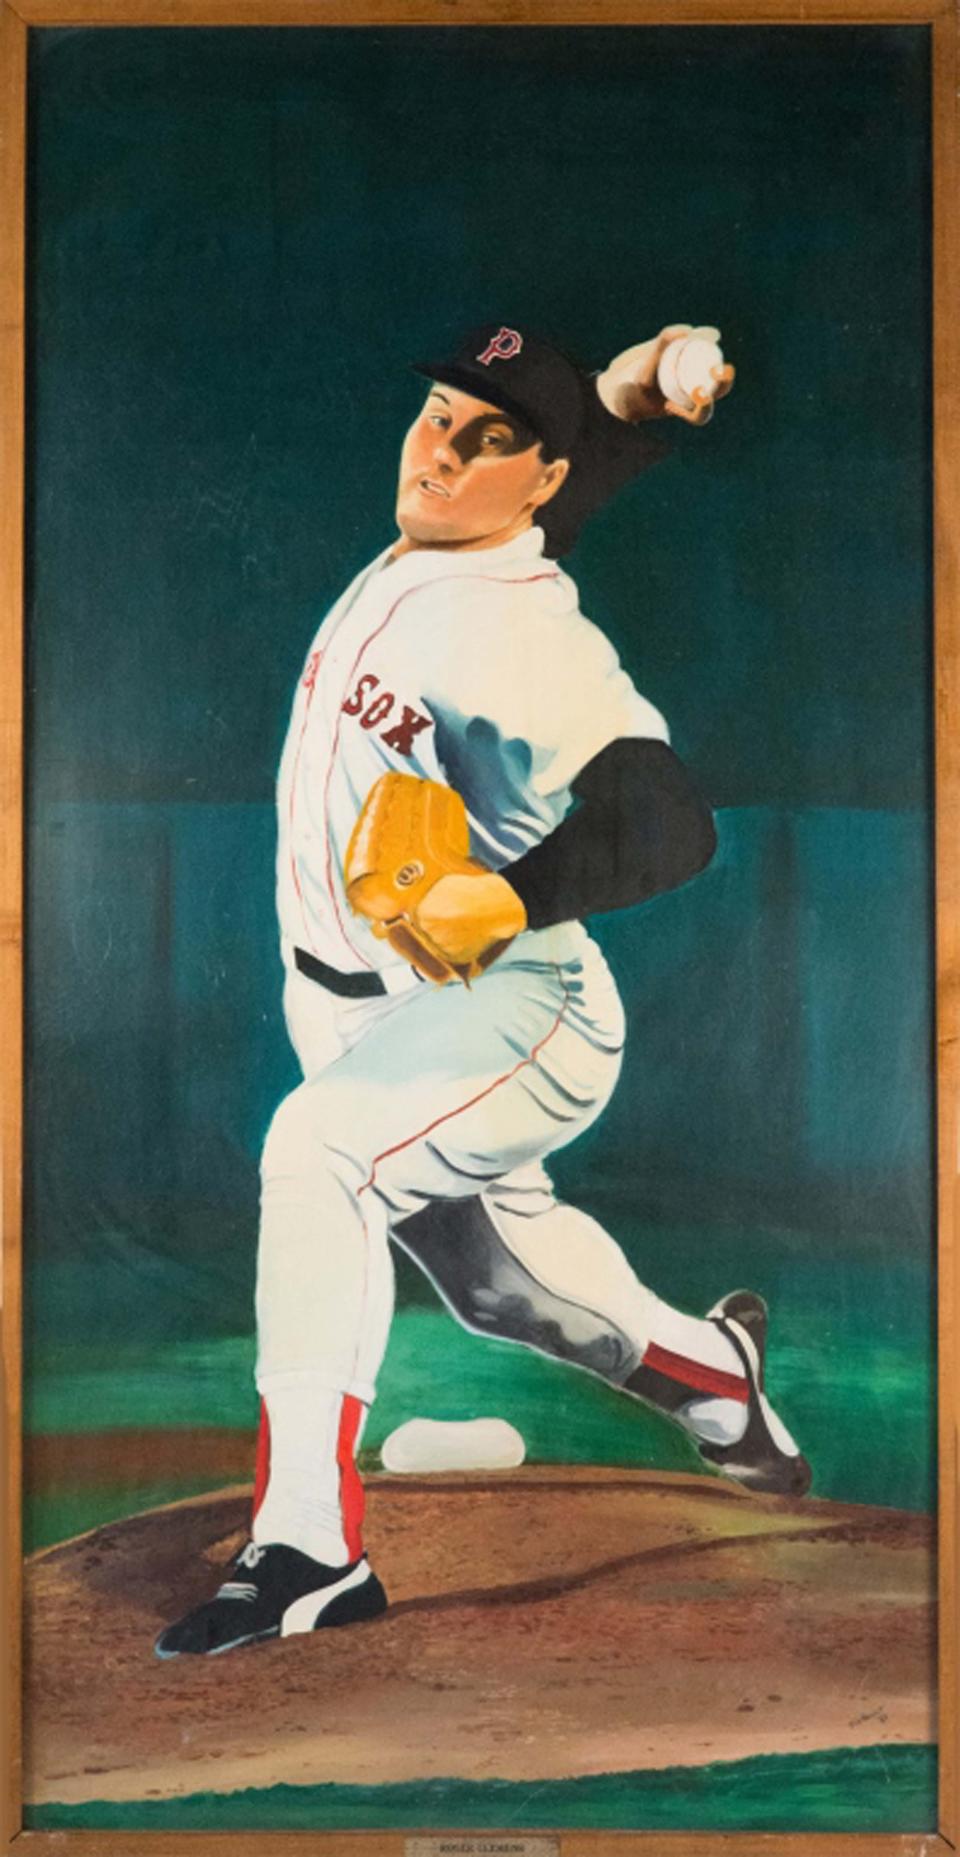 The hand-painted mural of former Boston Red Sox pitcher Roger Clemens, once displayed at McCoy Stadium, is among 42 murals that will be auctioned on March 18.